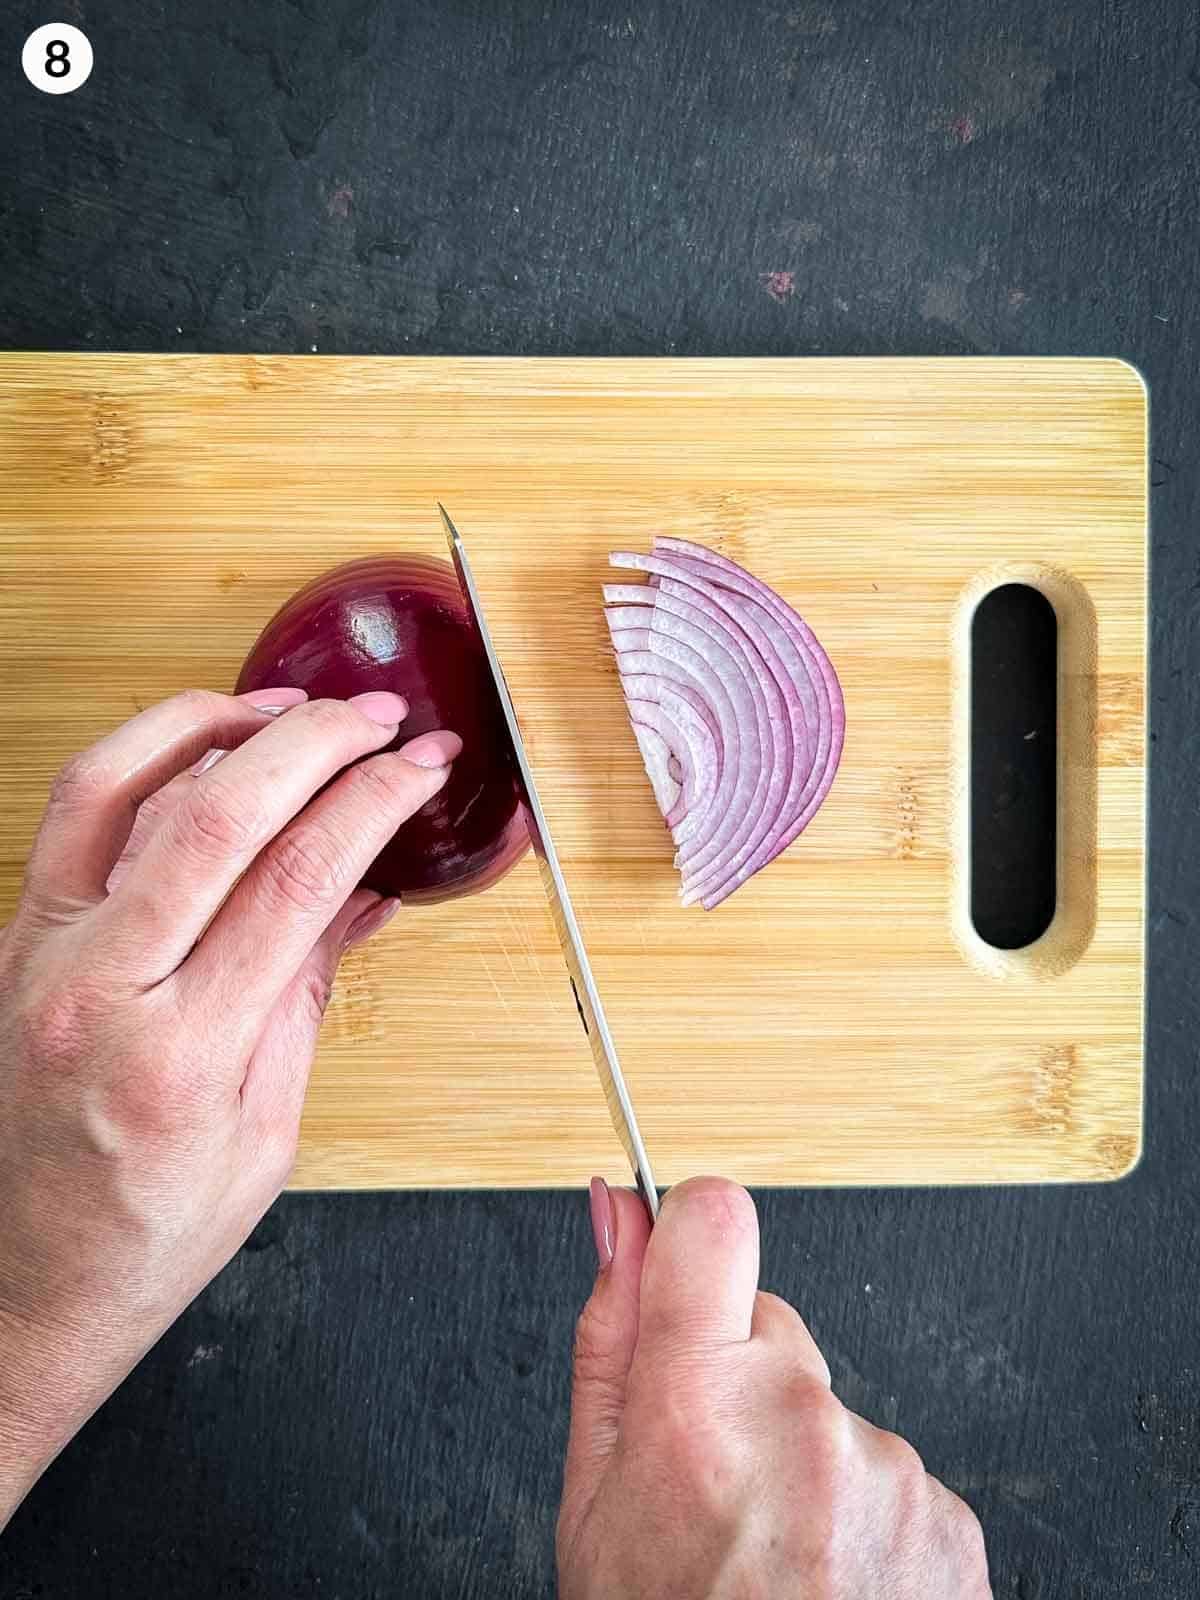 Slicing red onion with a knife on a wooden board